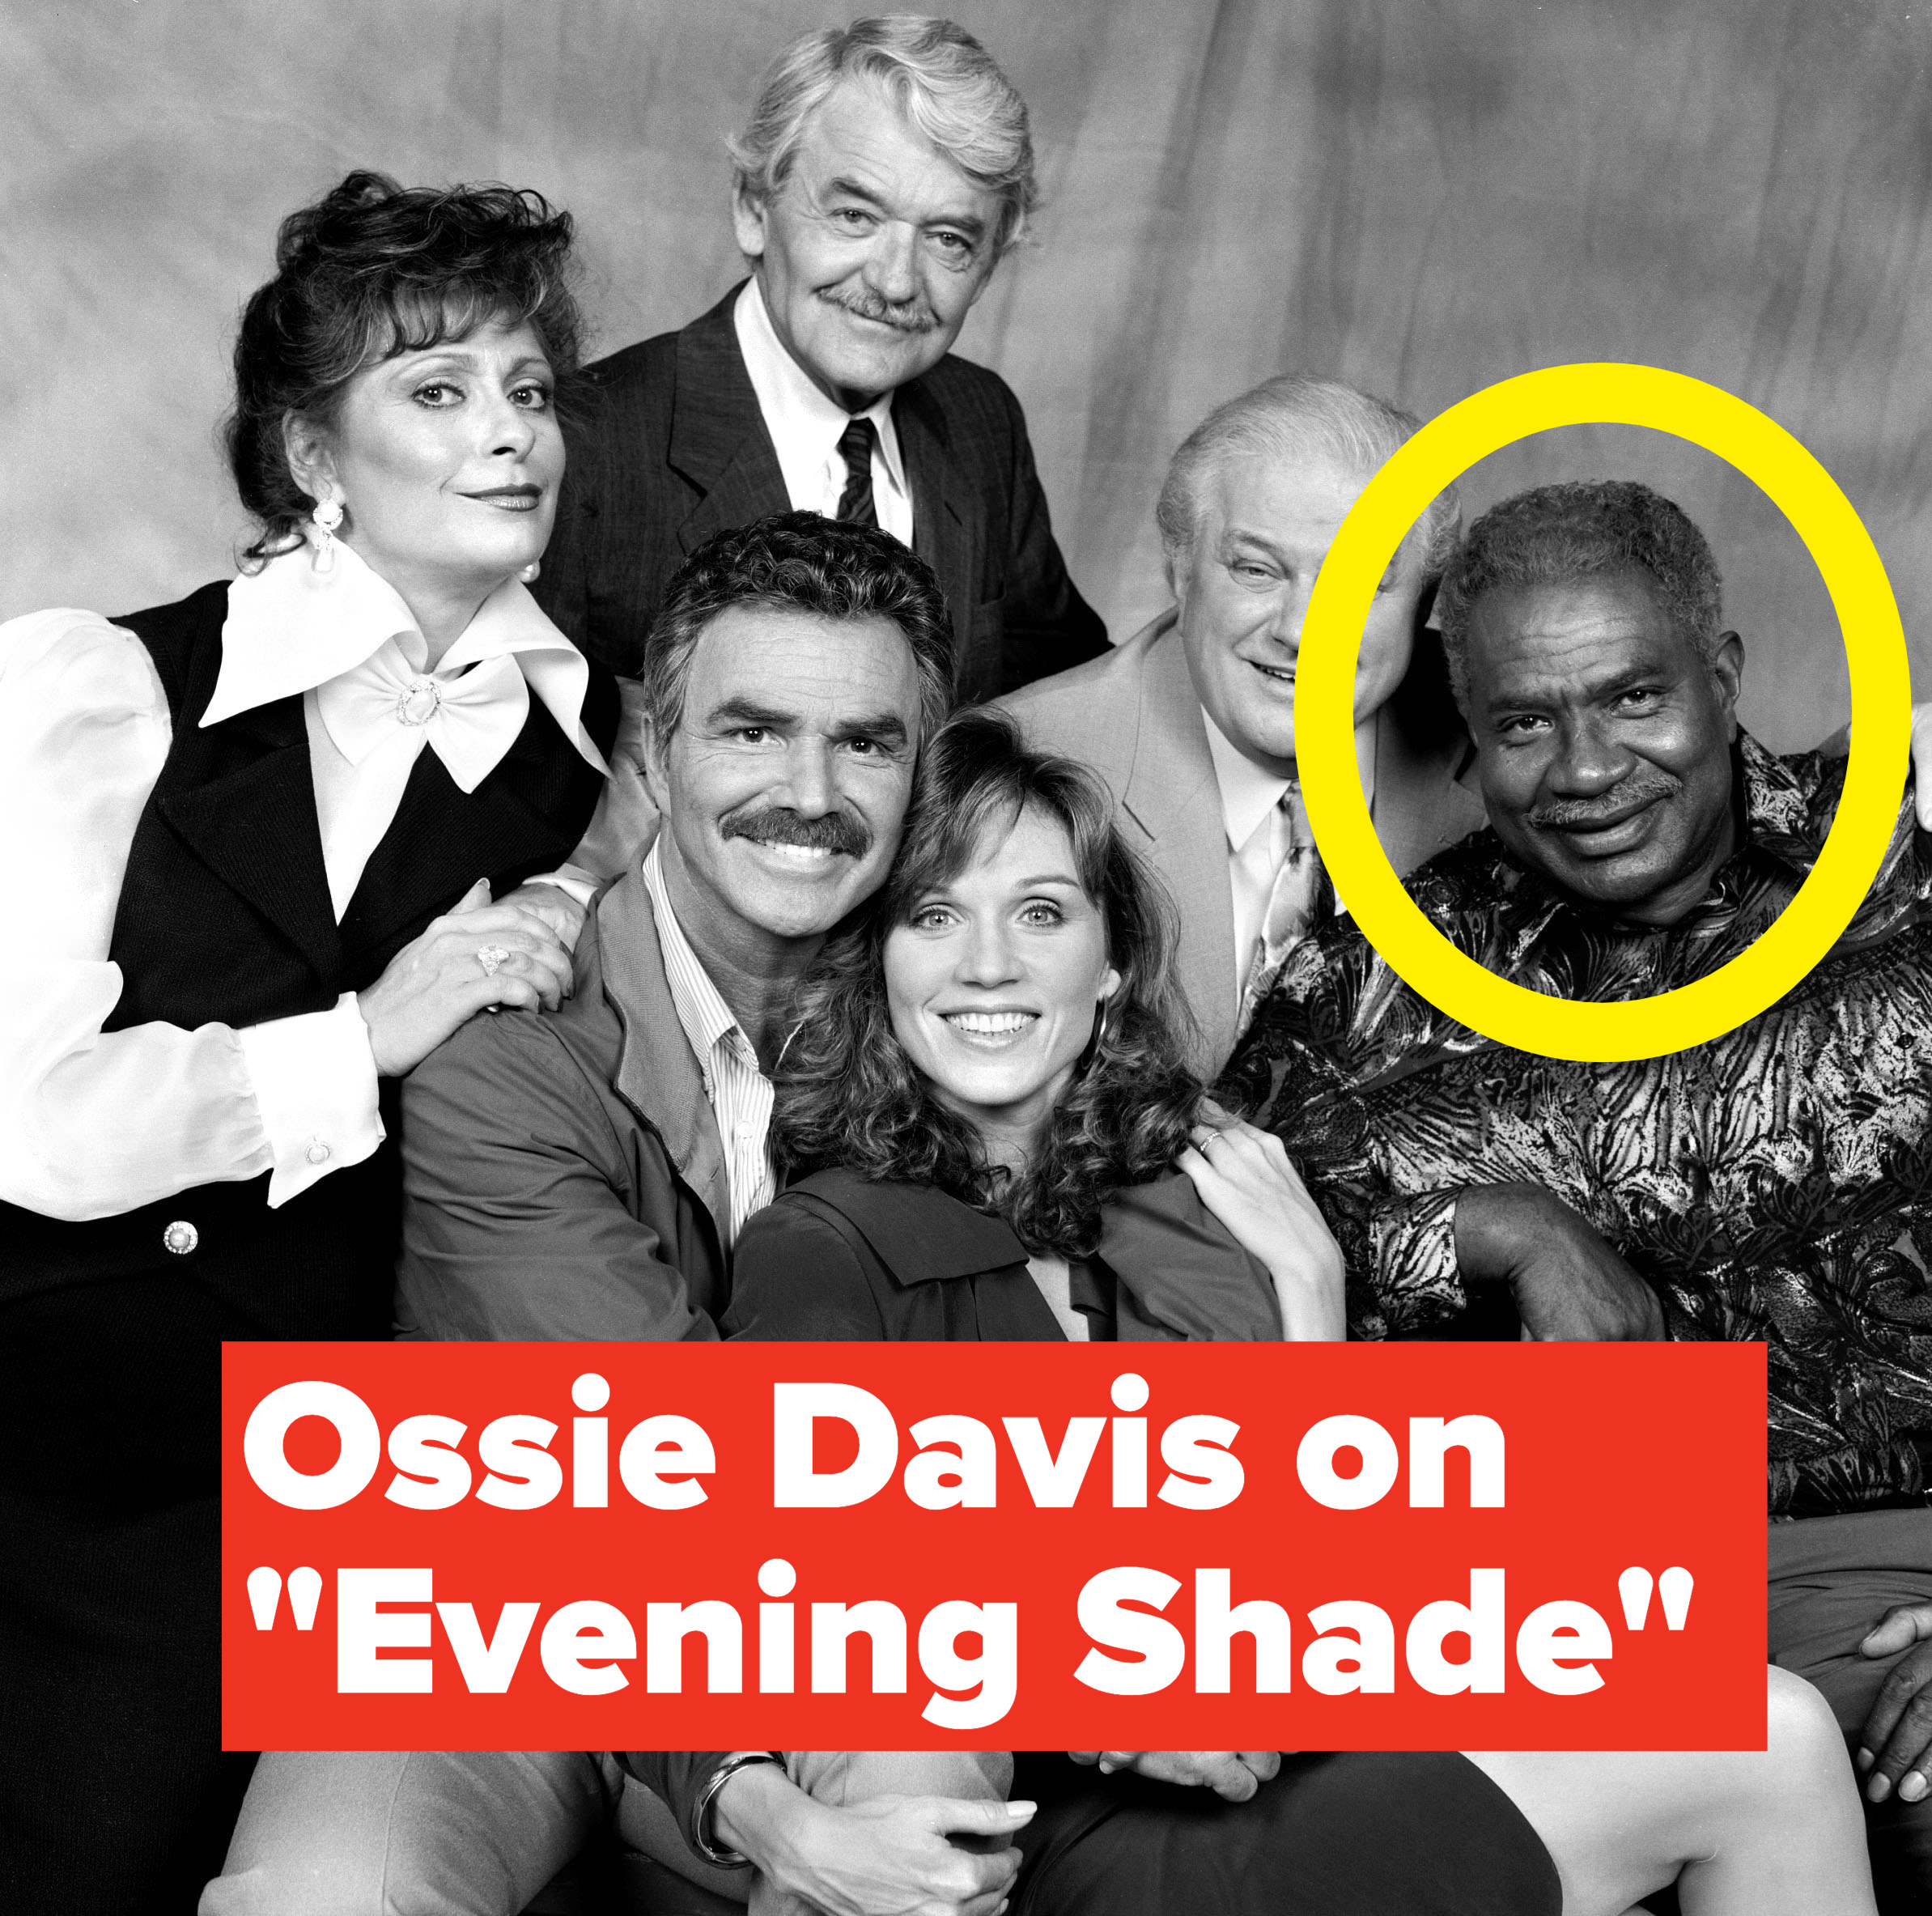 Ossie Davis sits on the right in a group photo